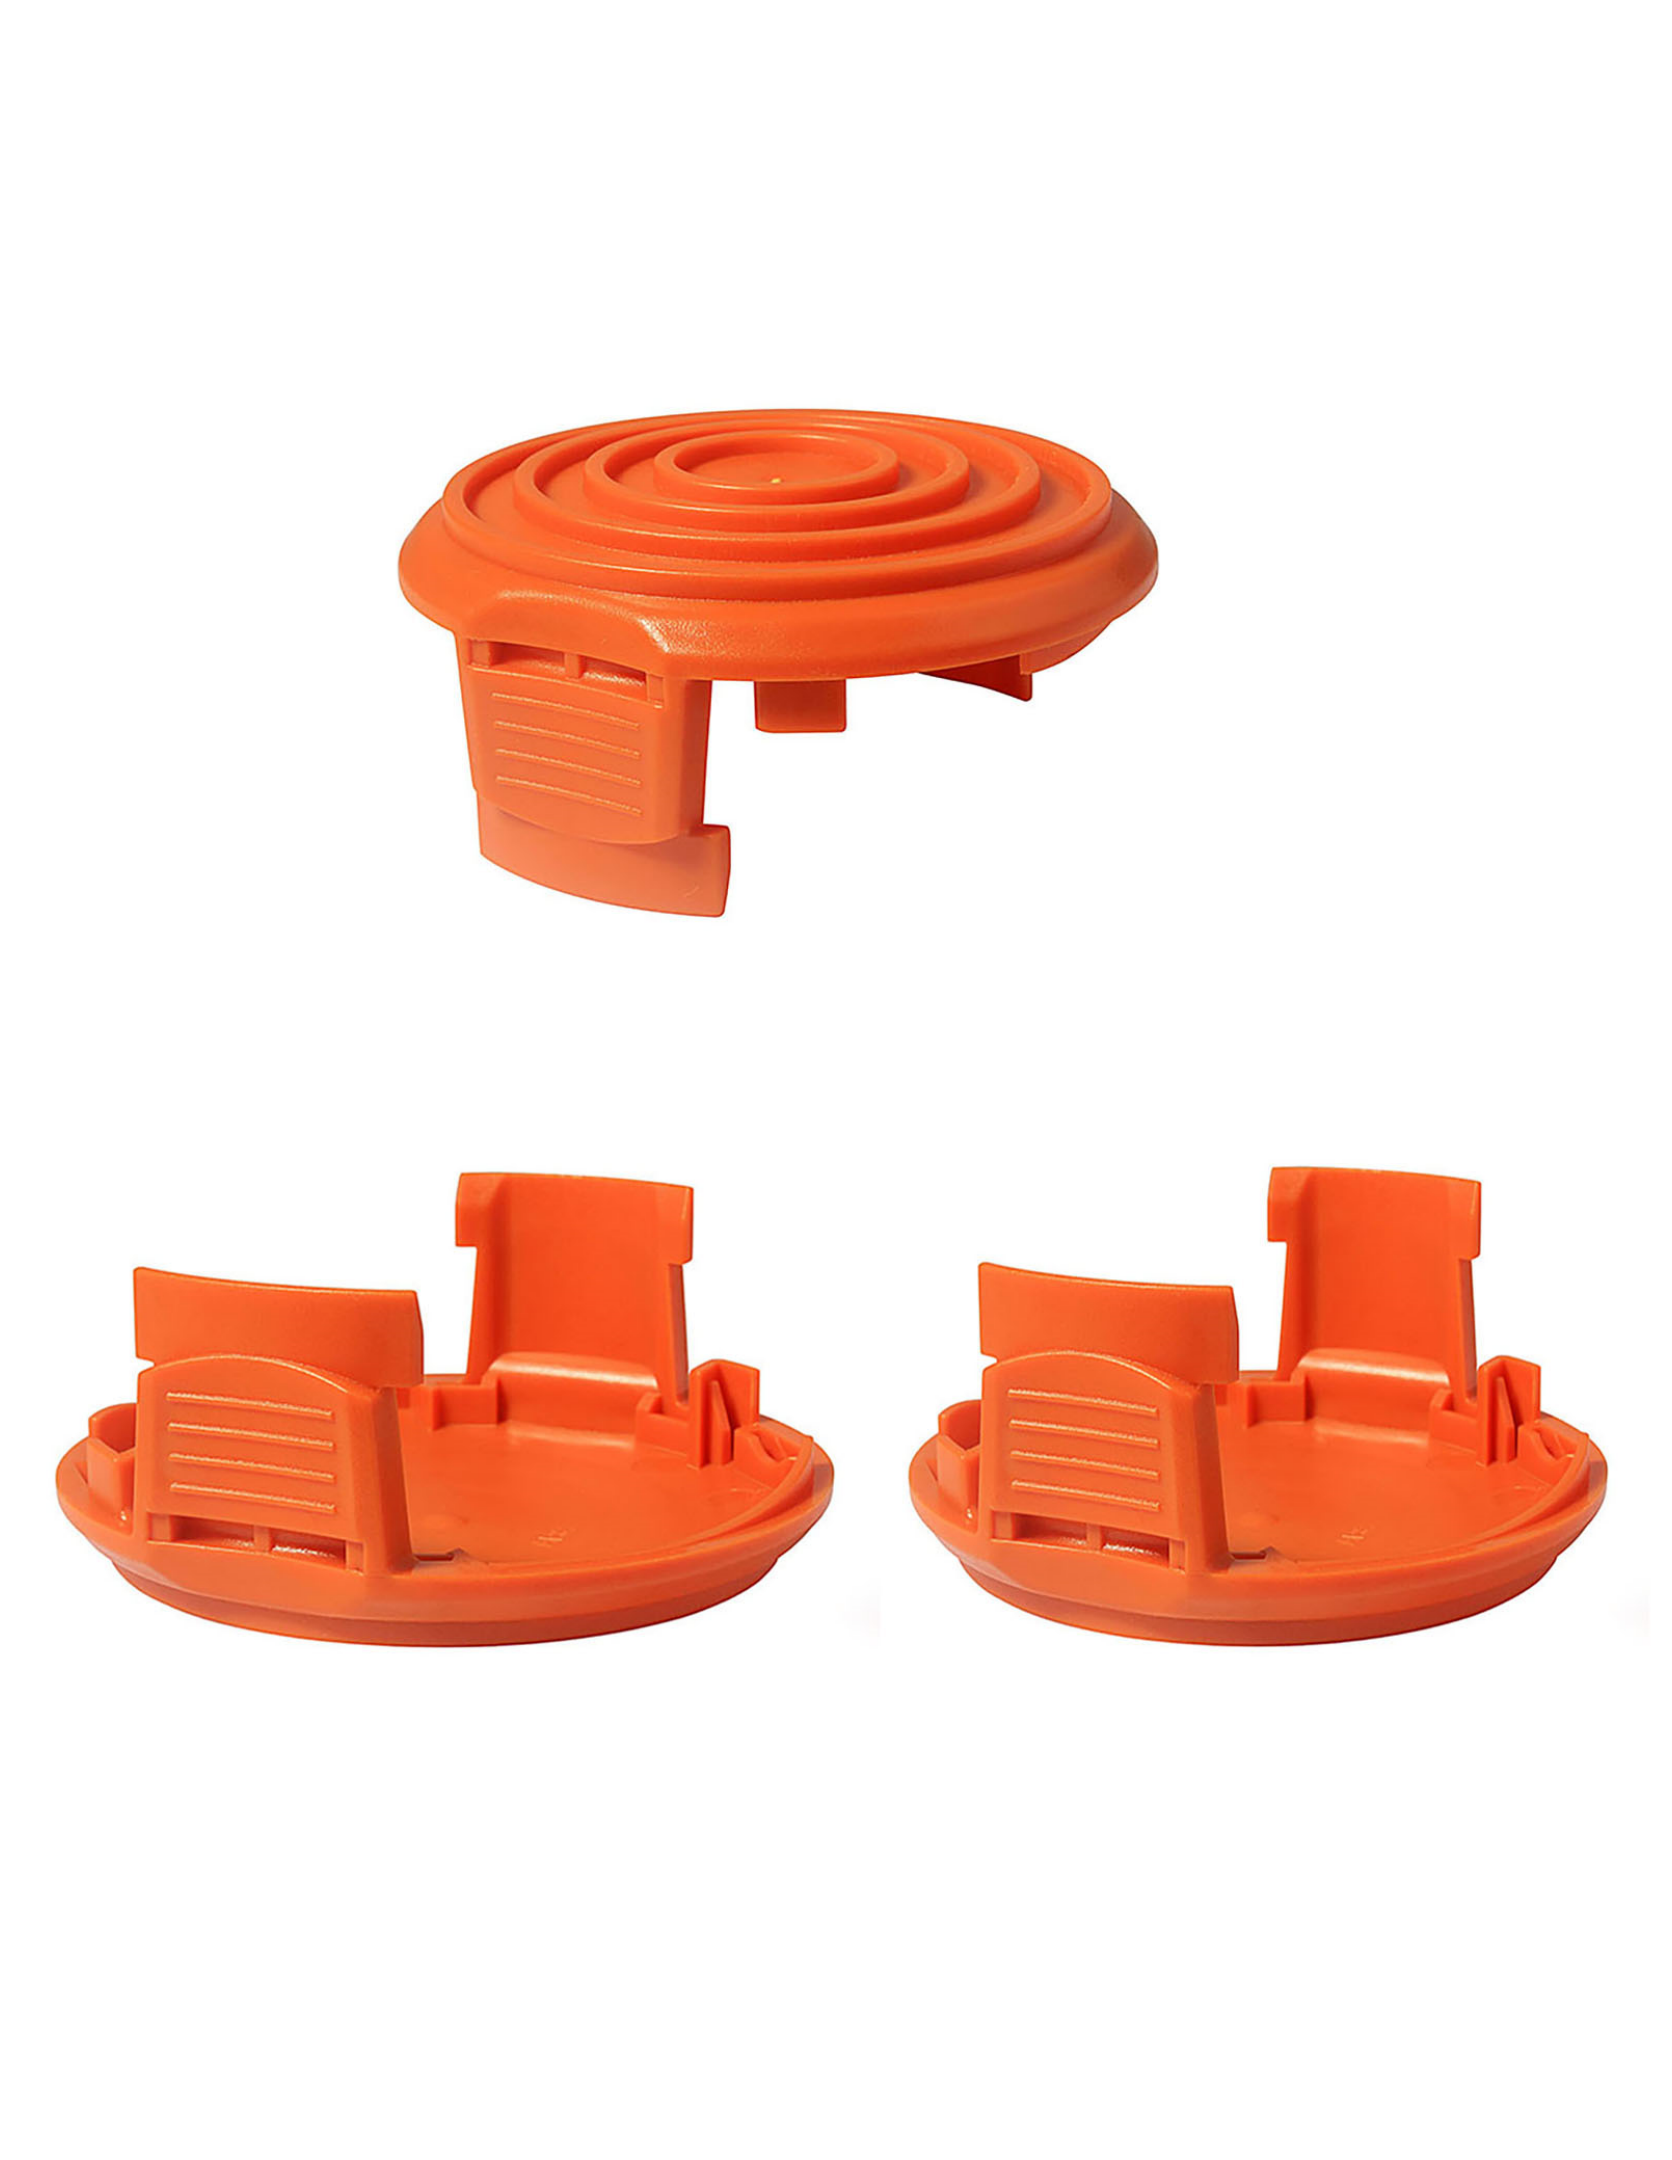 THTEN 50019417 Weed Eater Replacement Spools Cap Covers Compatible with Worx WA0007 WG116 WG119,50022833 Trimmer Line Cover,Weed Eater Spool Cap for Worx Parts 3 Pack